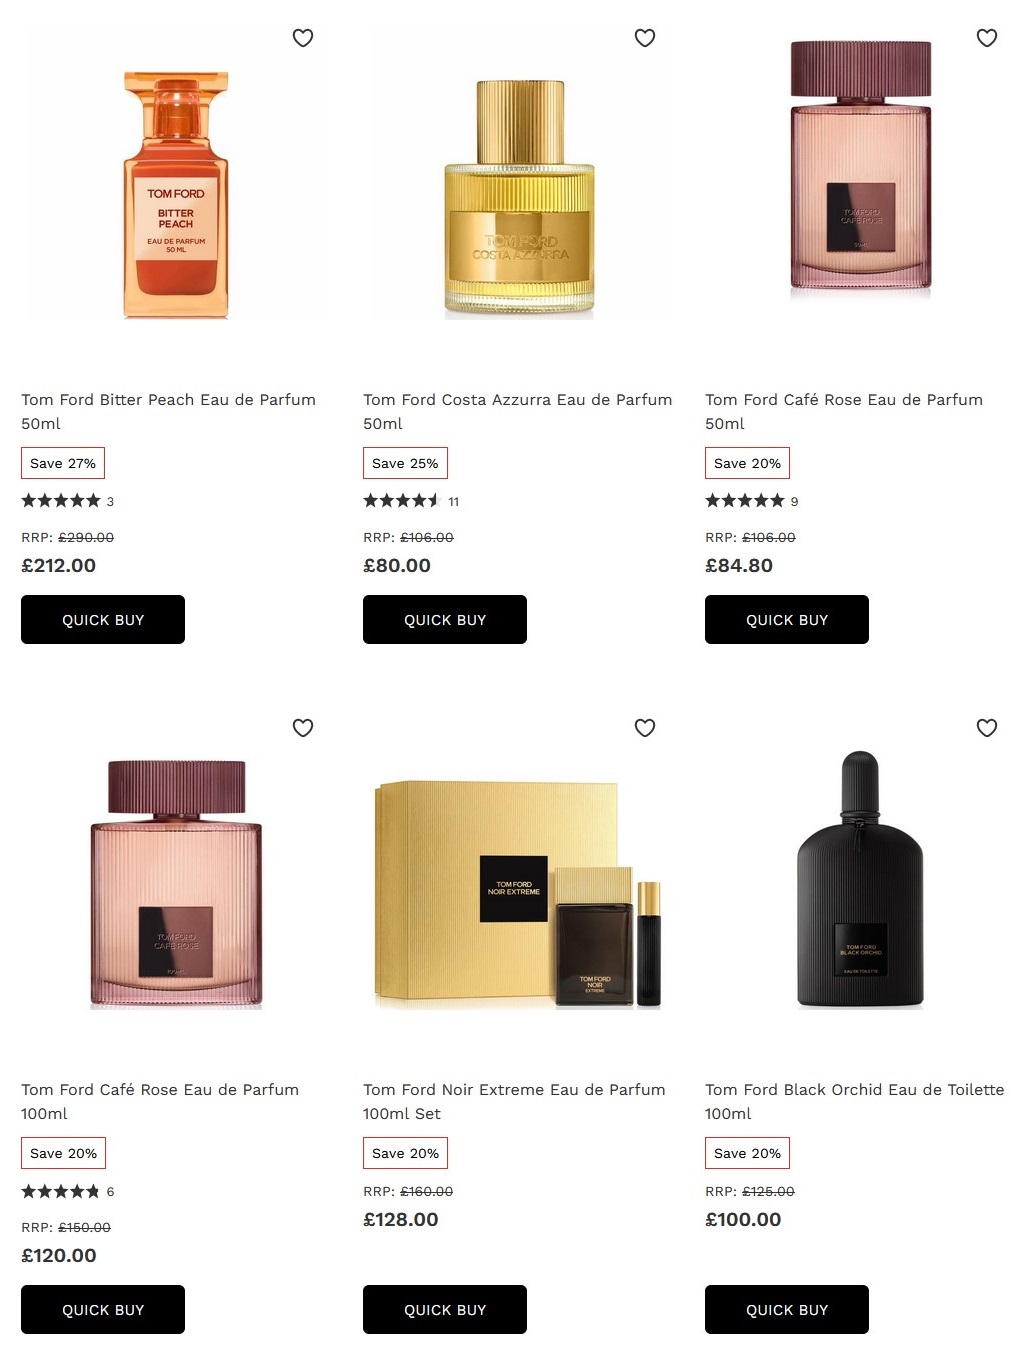 Up to 27% off Tom Ford at Lookfantastic